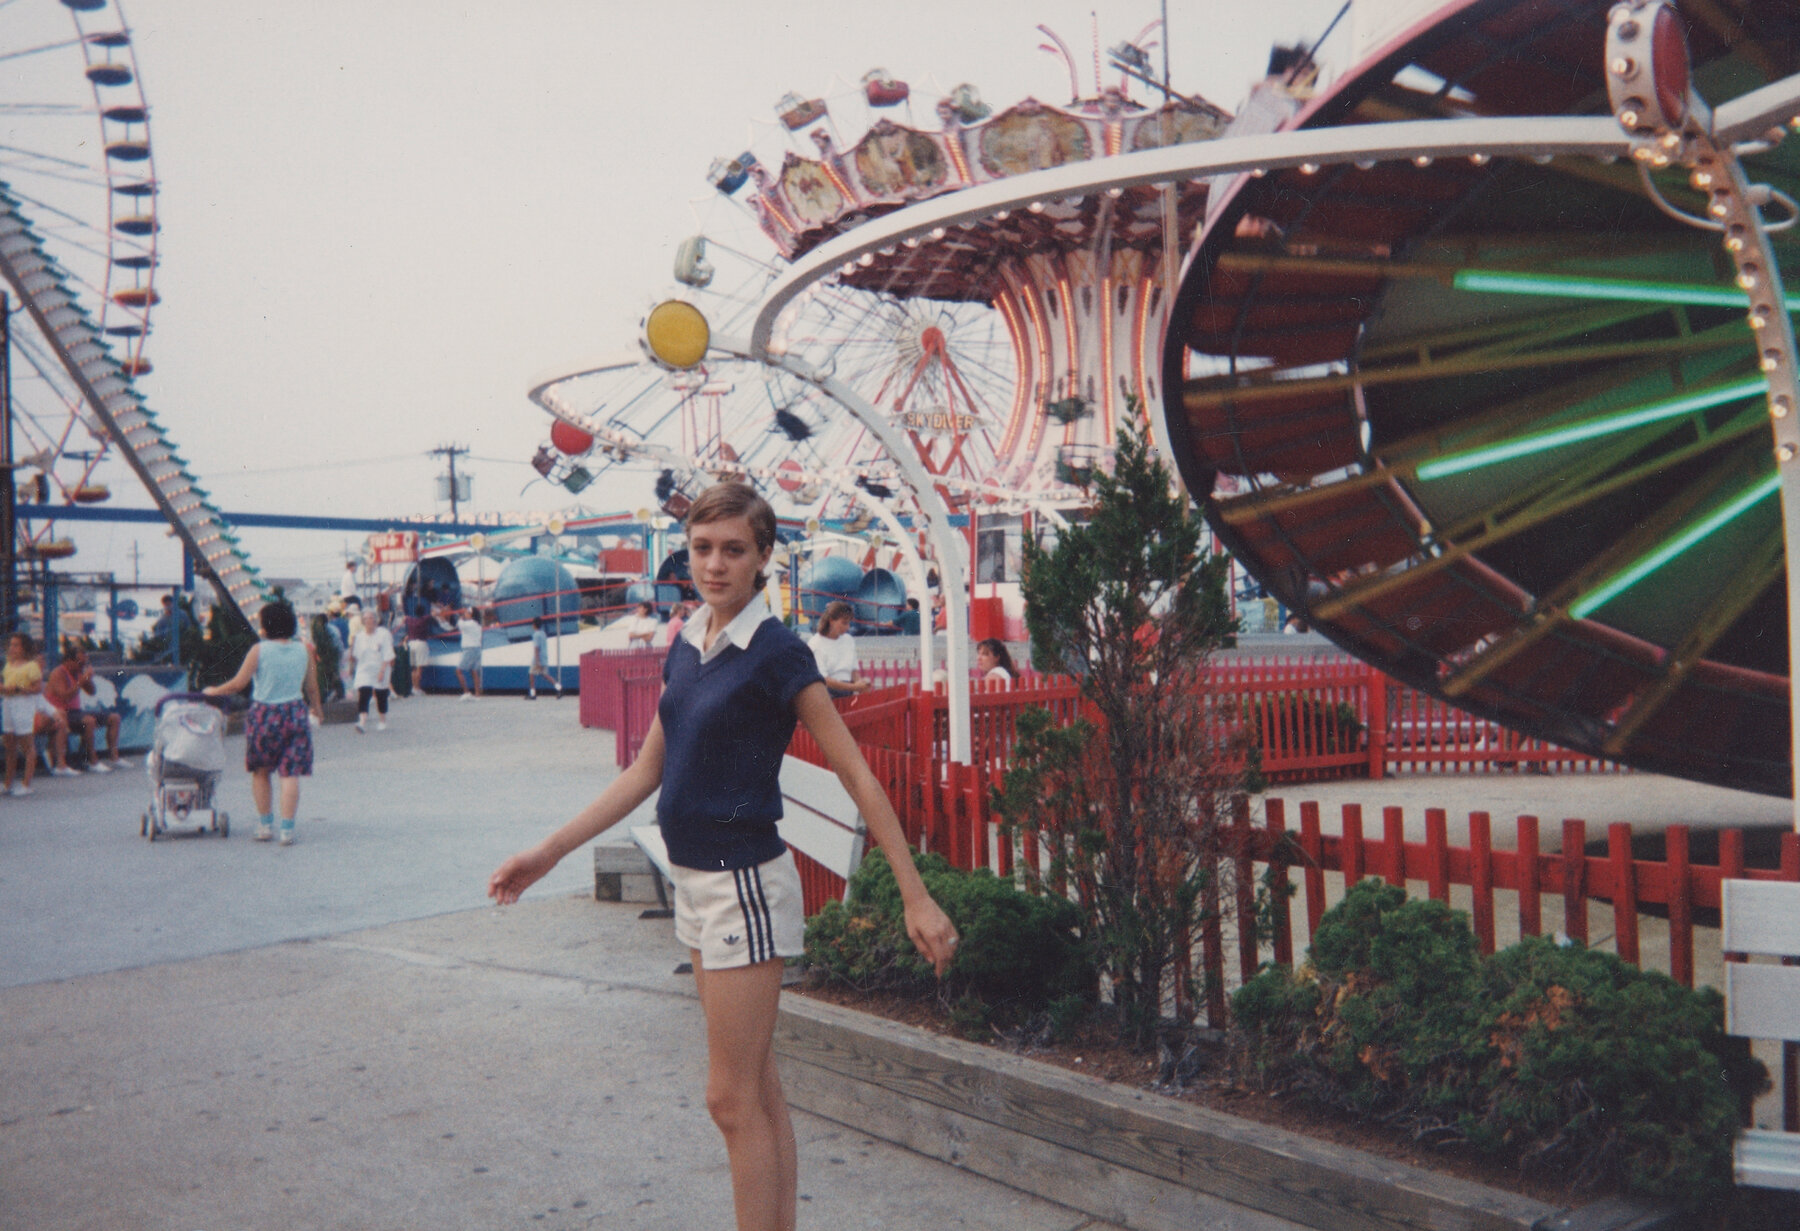 Chloë Sevigny turns to face the camera. Behind her are various theme park attractions, including a ferris wheel and a carousel.